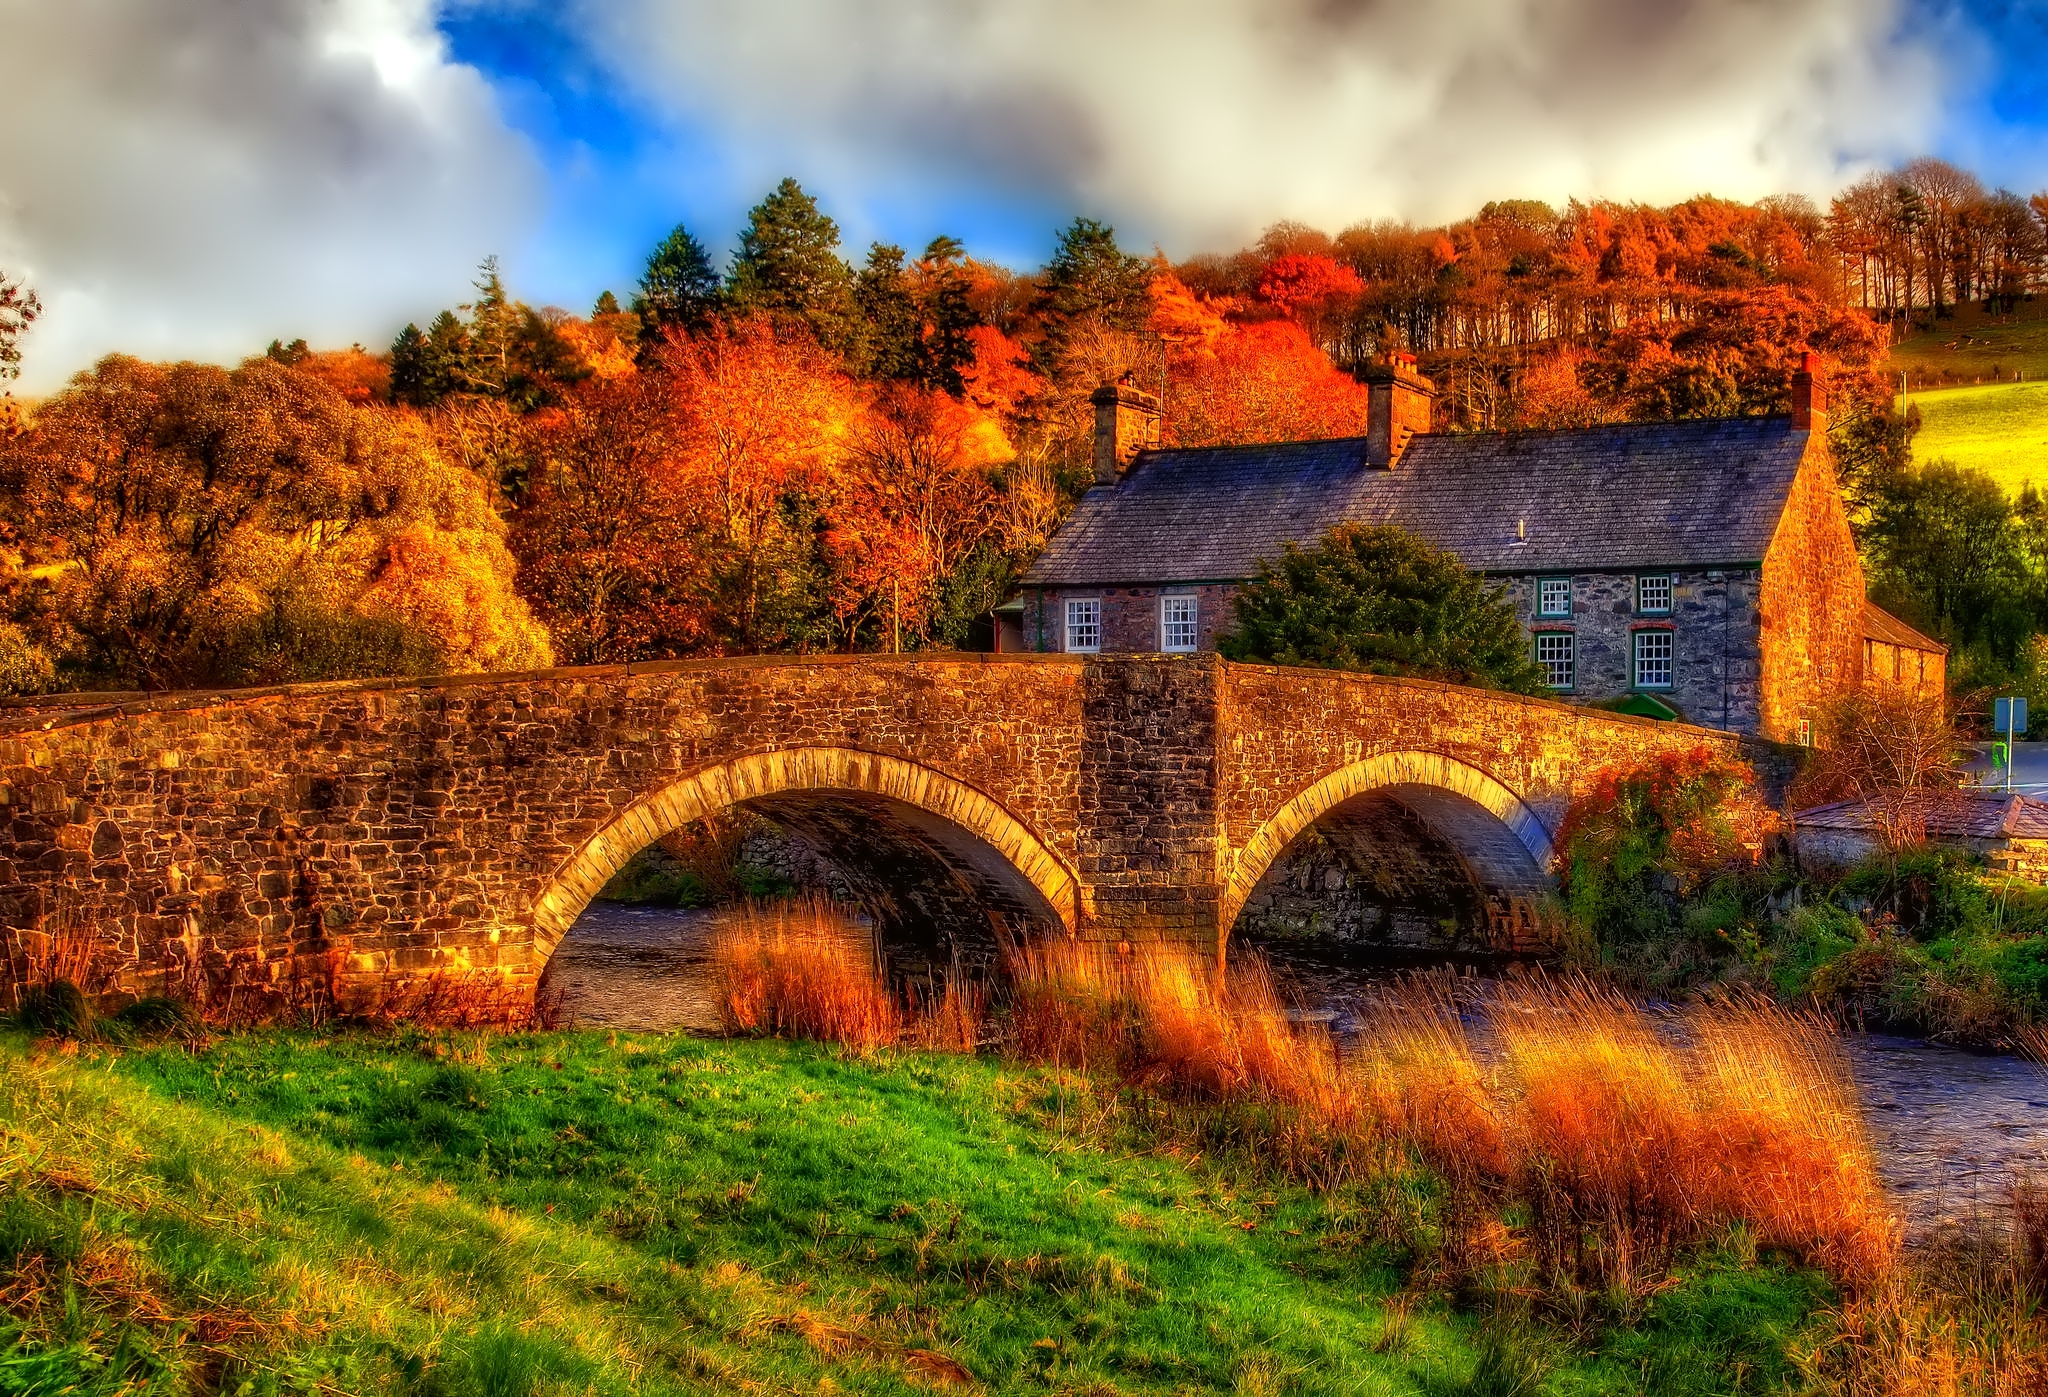 wallpapers wales, photography, hdr, bridge, fall, grass, house, man made, river, united kingdom